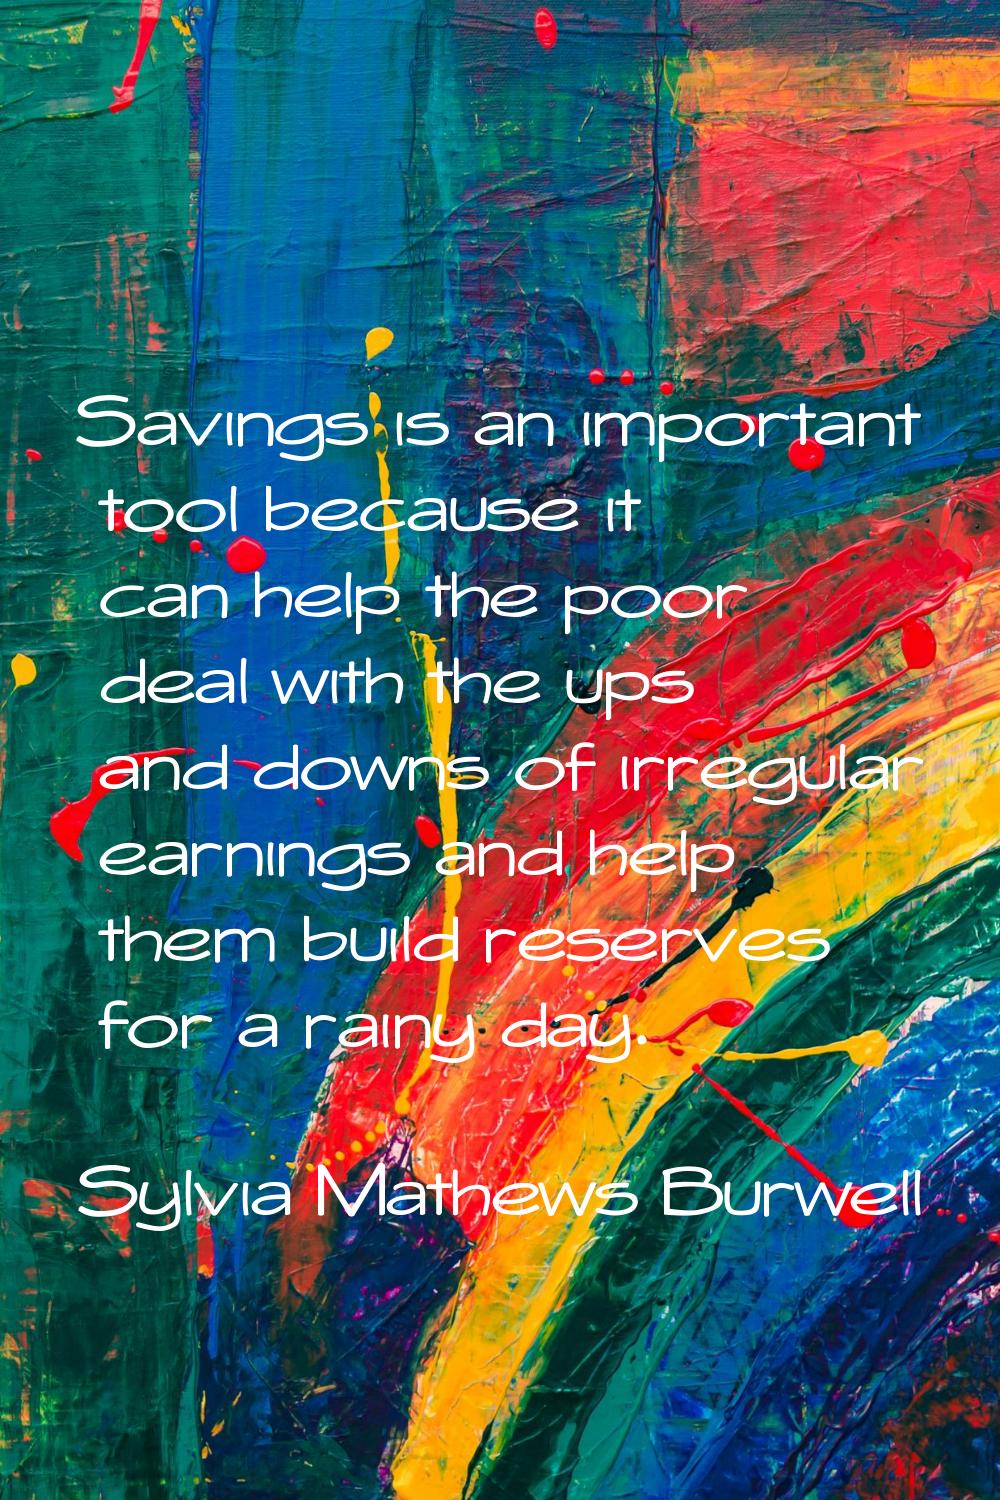 Savings is an important tool because it can help the poor deal with the ups and downs of irregular 